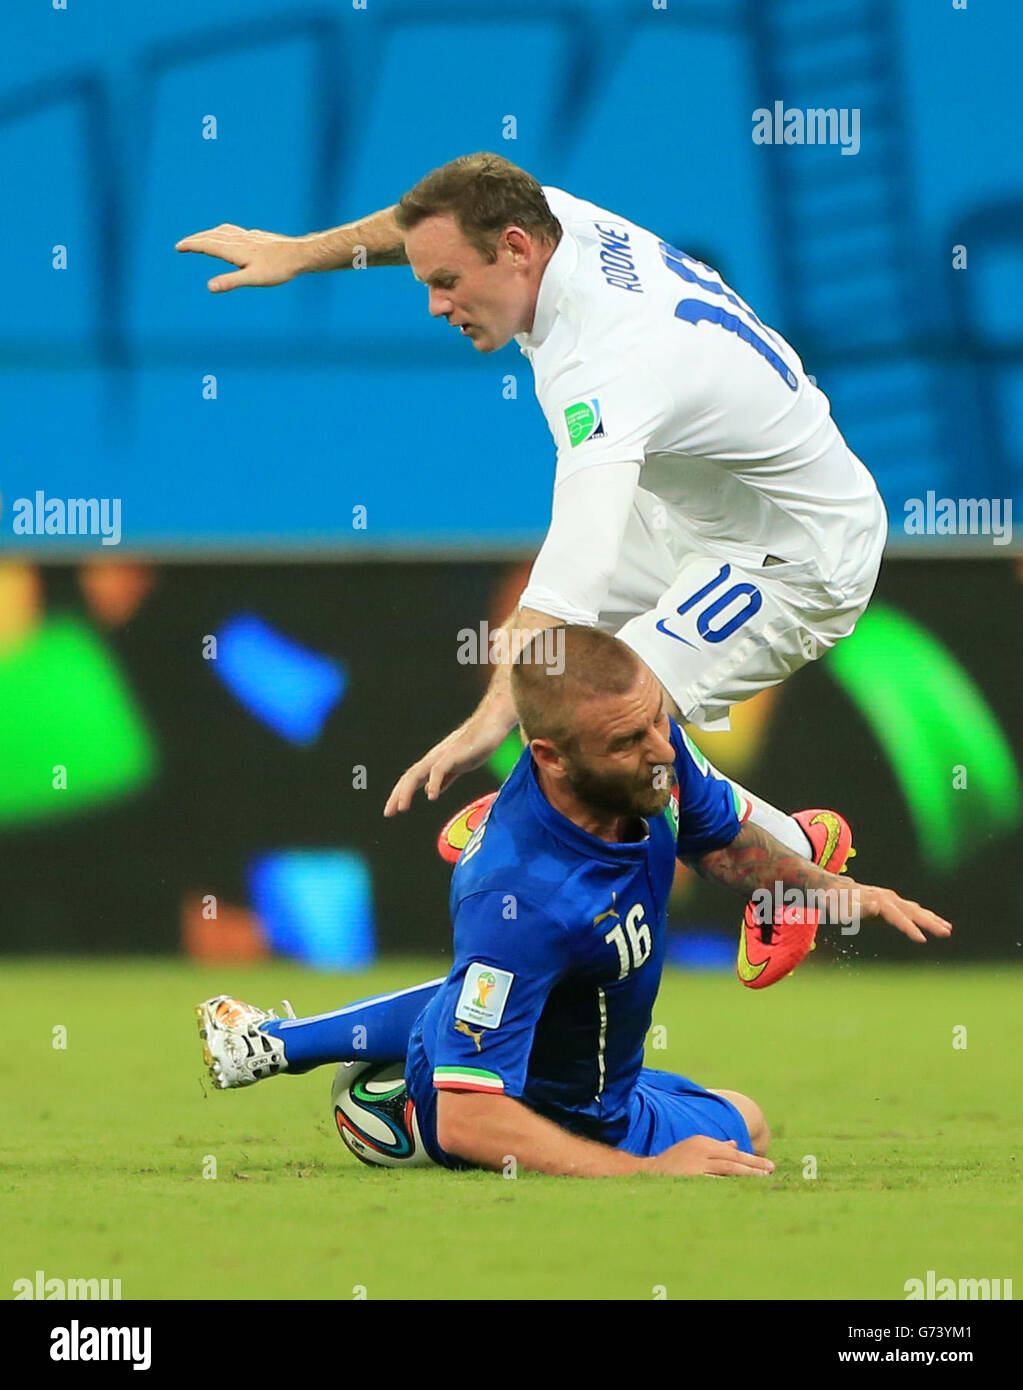 England's Wayne Rooney is tackled by Italy's Daniele de Rossi (bottom) during the FIFA World Cup, Group D match at the Arena da Amazonia, Manaus, Brazil. Stock Photo